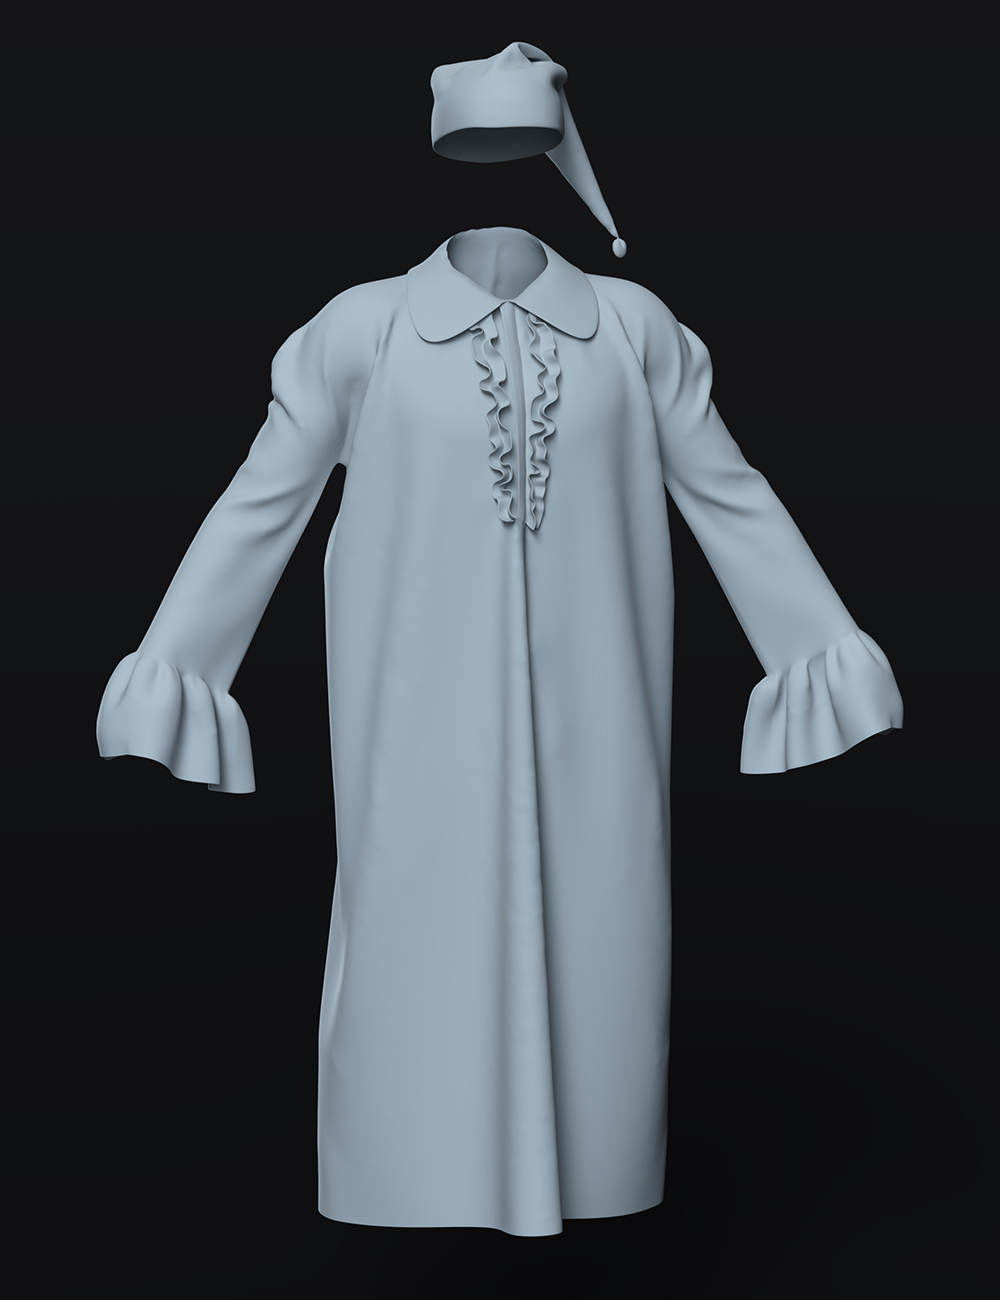 dForce Ebenezer Scrooge NightDress Outfit For Genesis 8 and Genesis 8.1 Males by: Beautyworks, 3D Models by Daz 3D